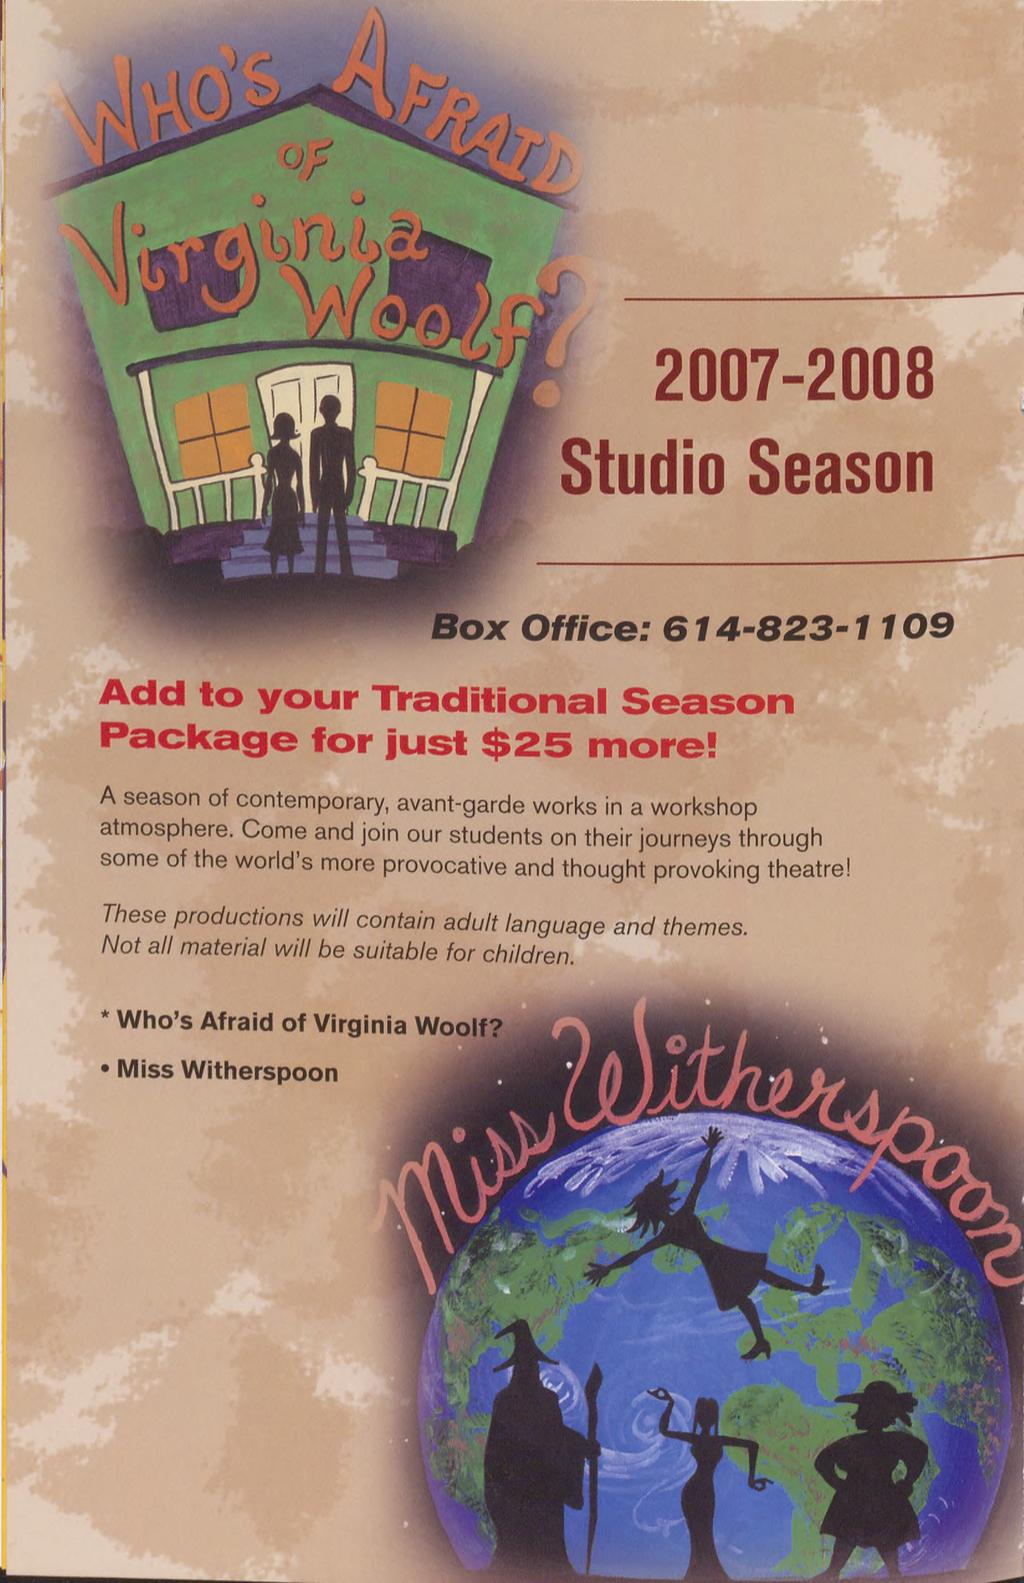 studio Season ox Office: 614-823-1109 Add to your Tlraditional Season Package for just $25 more! A season of contemporary, avant-garde works in a workshop atmosphere.